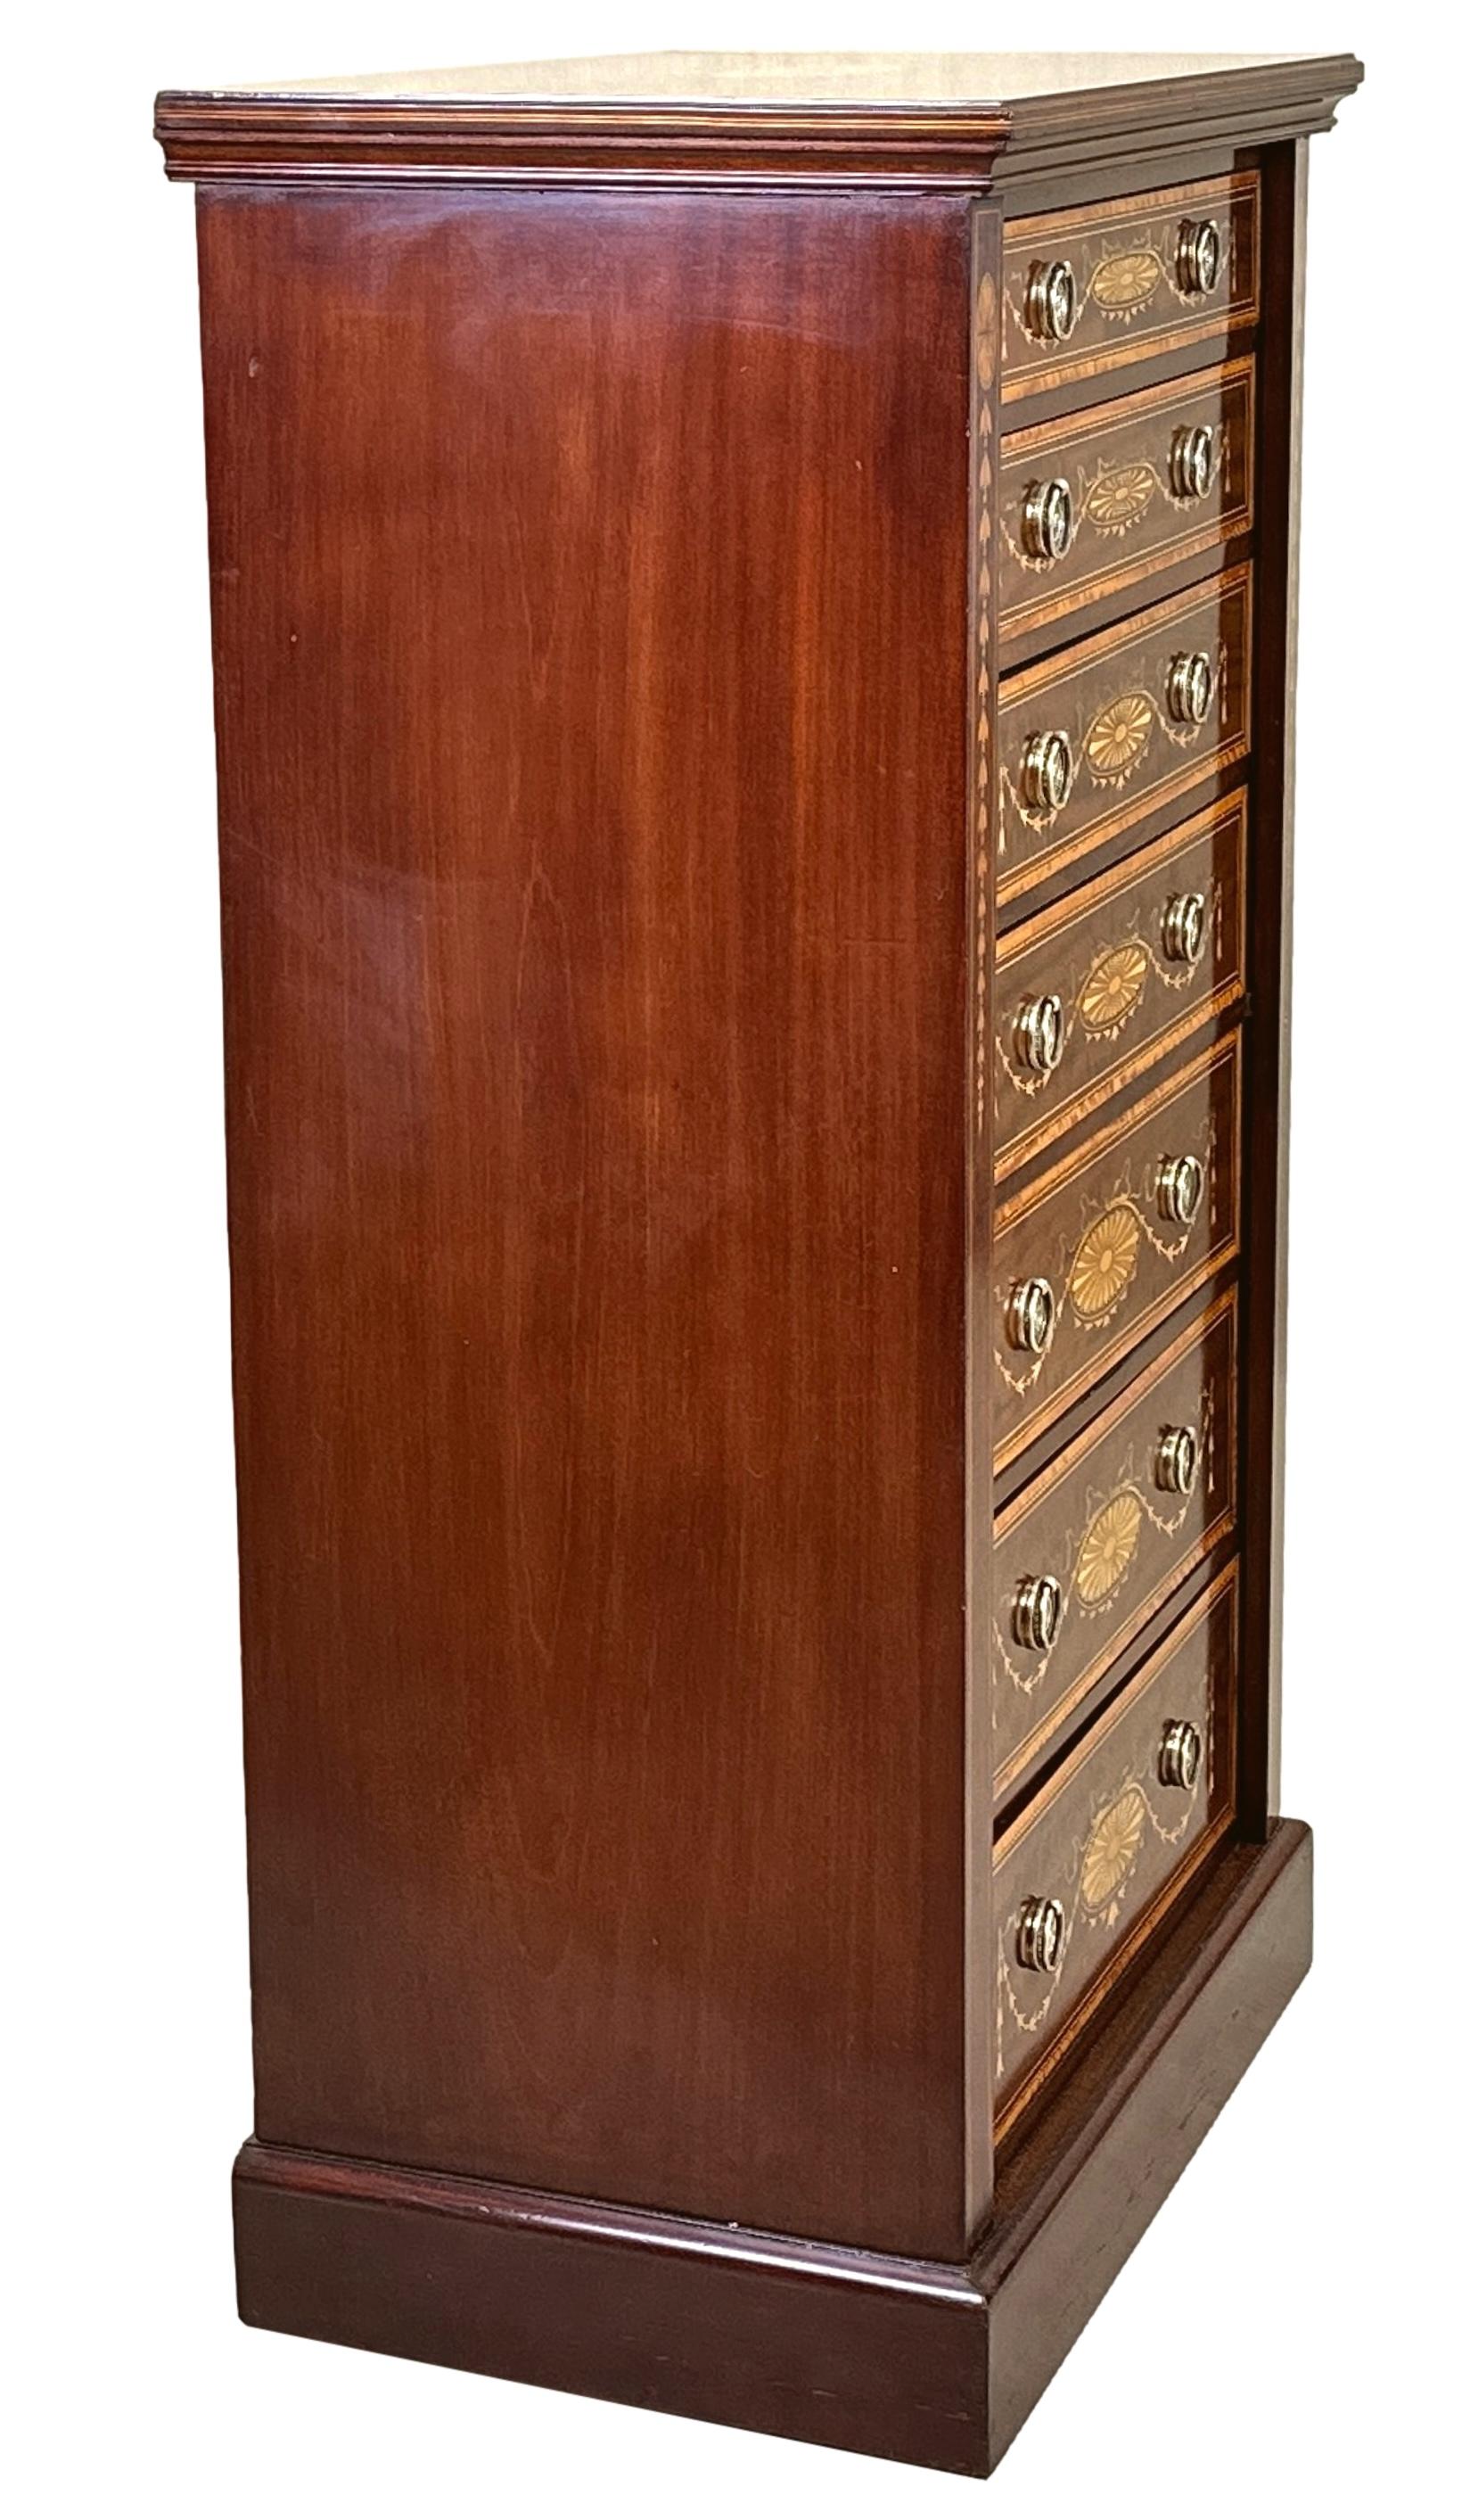 An Exceptional Quality Late 19th Century Mahogany And Satinwood Wellington Chest Of Drawers, Having Superbly Figured Rectangular Top With Inlaid And Crossbanded Decoration, Over Seven Mahogany Lined Drawers With Profuse Inlaid Decoration And